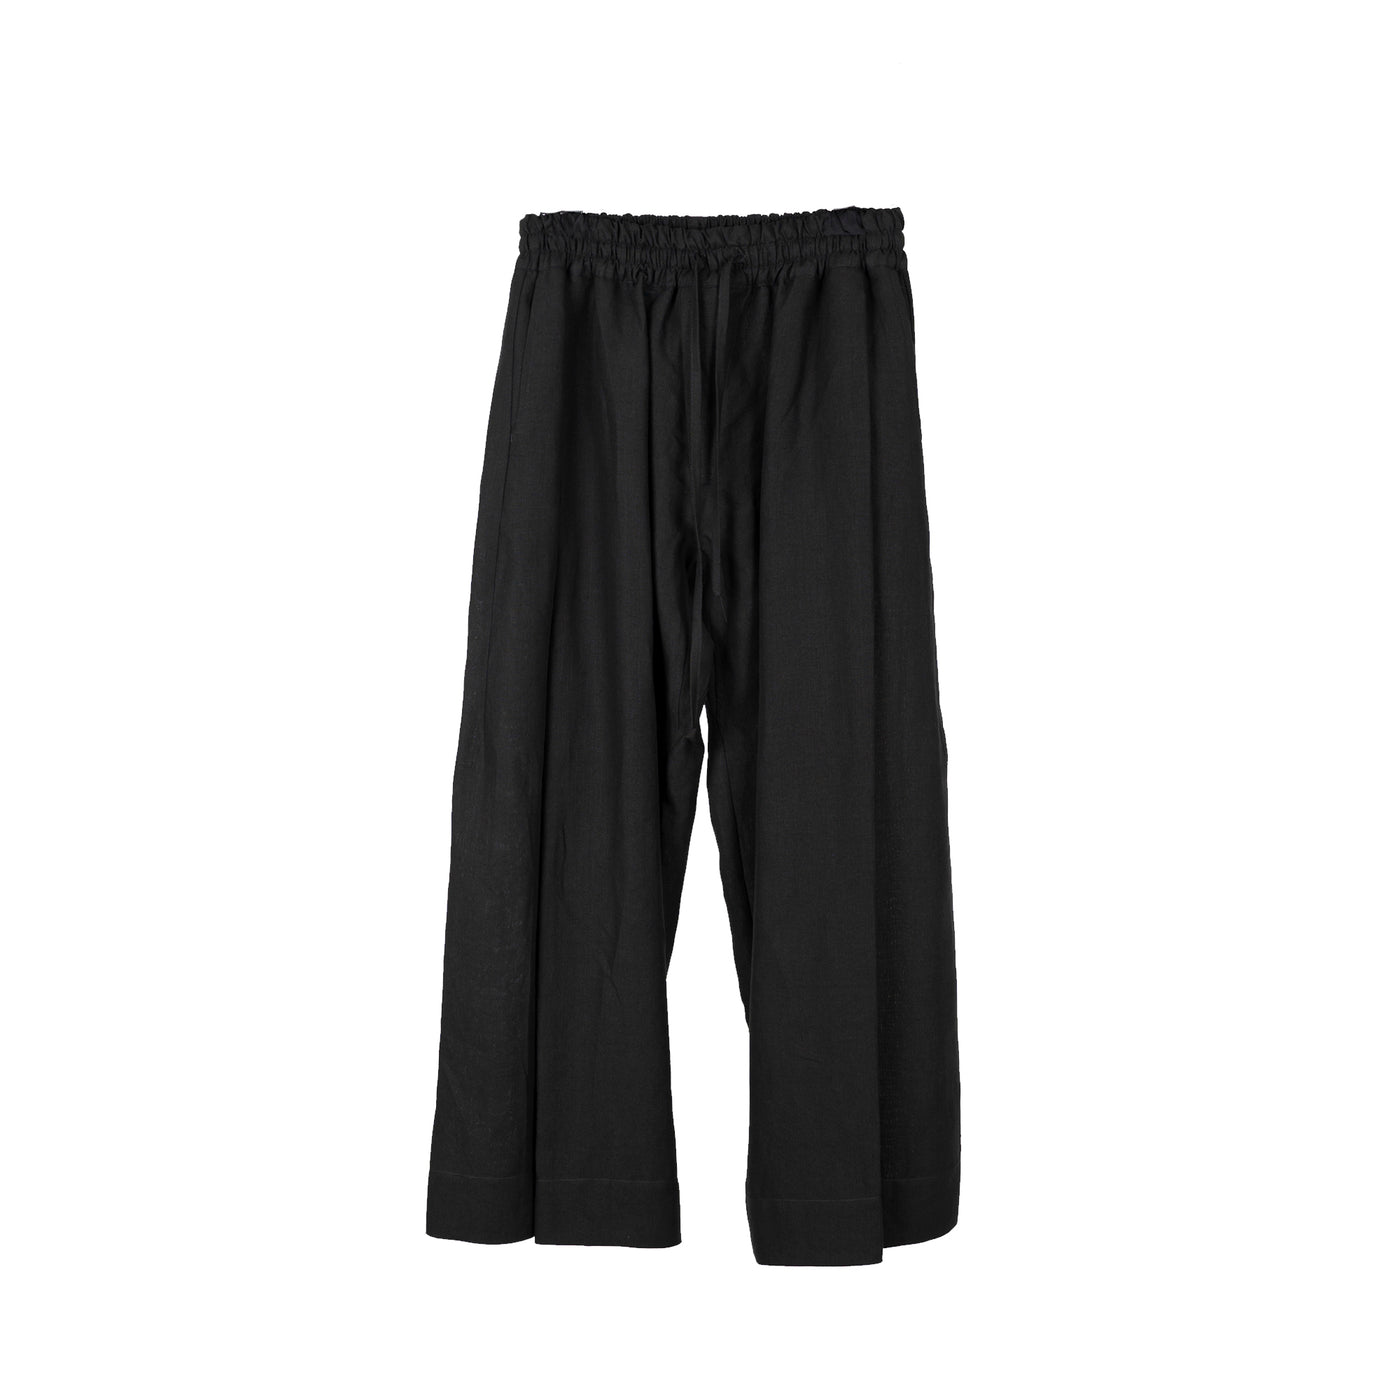 TROUSERS #77 -  BLACK PAPER CLOTH